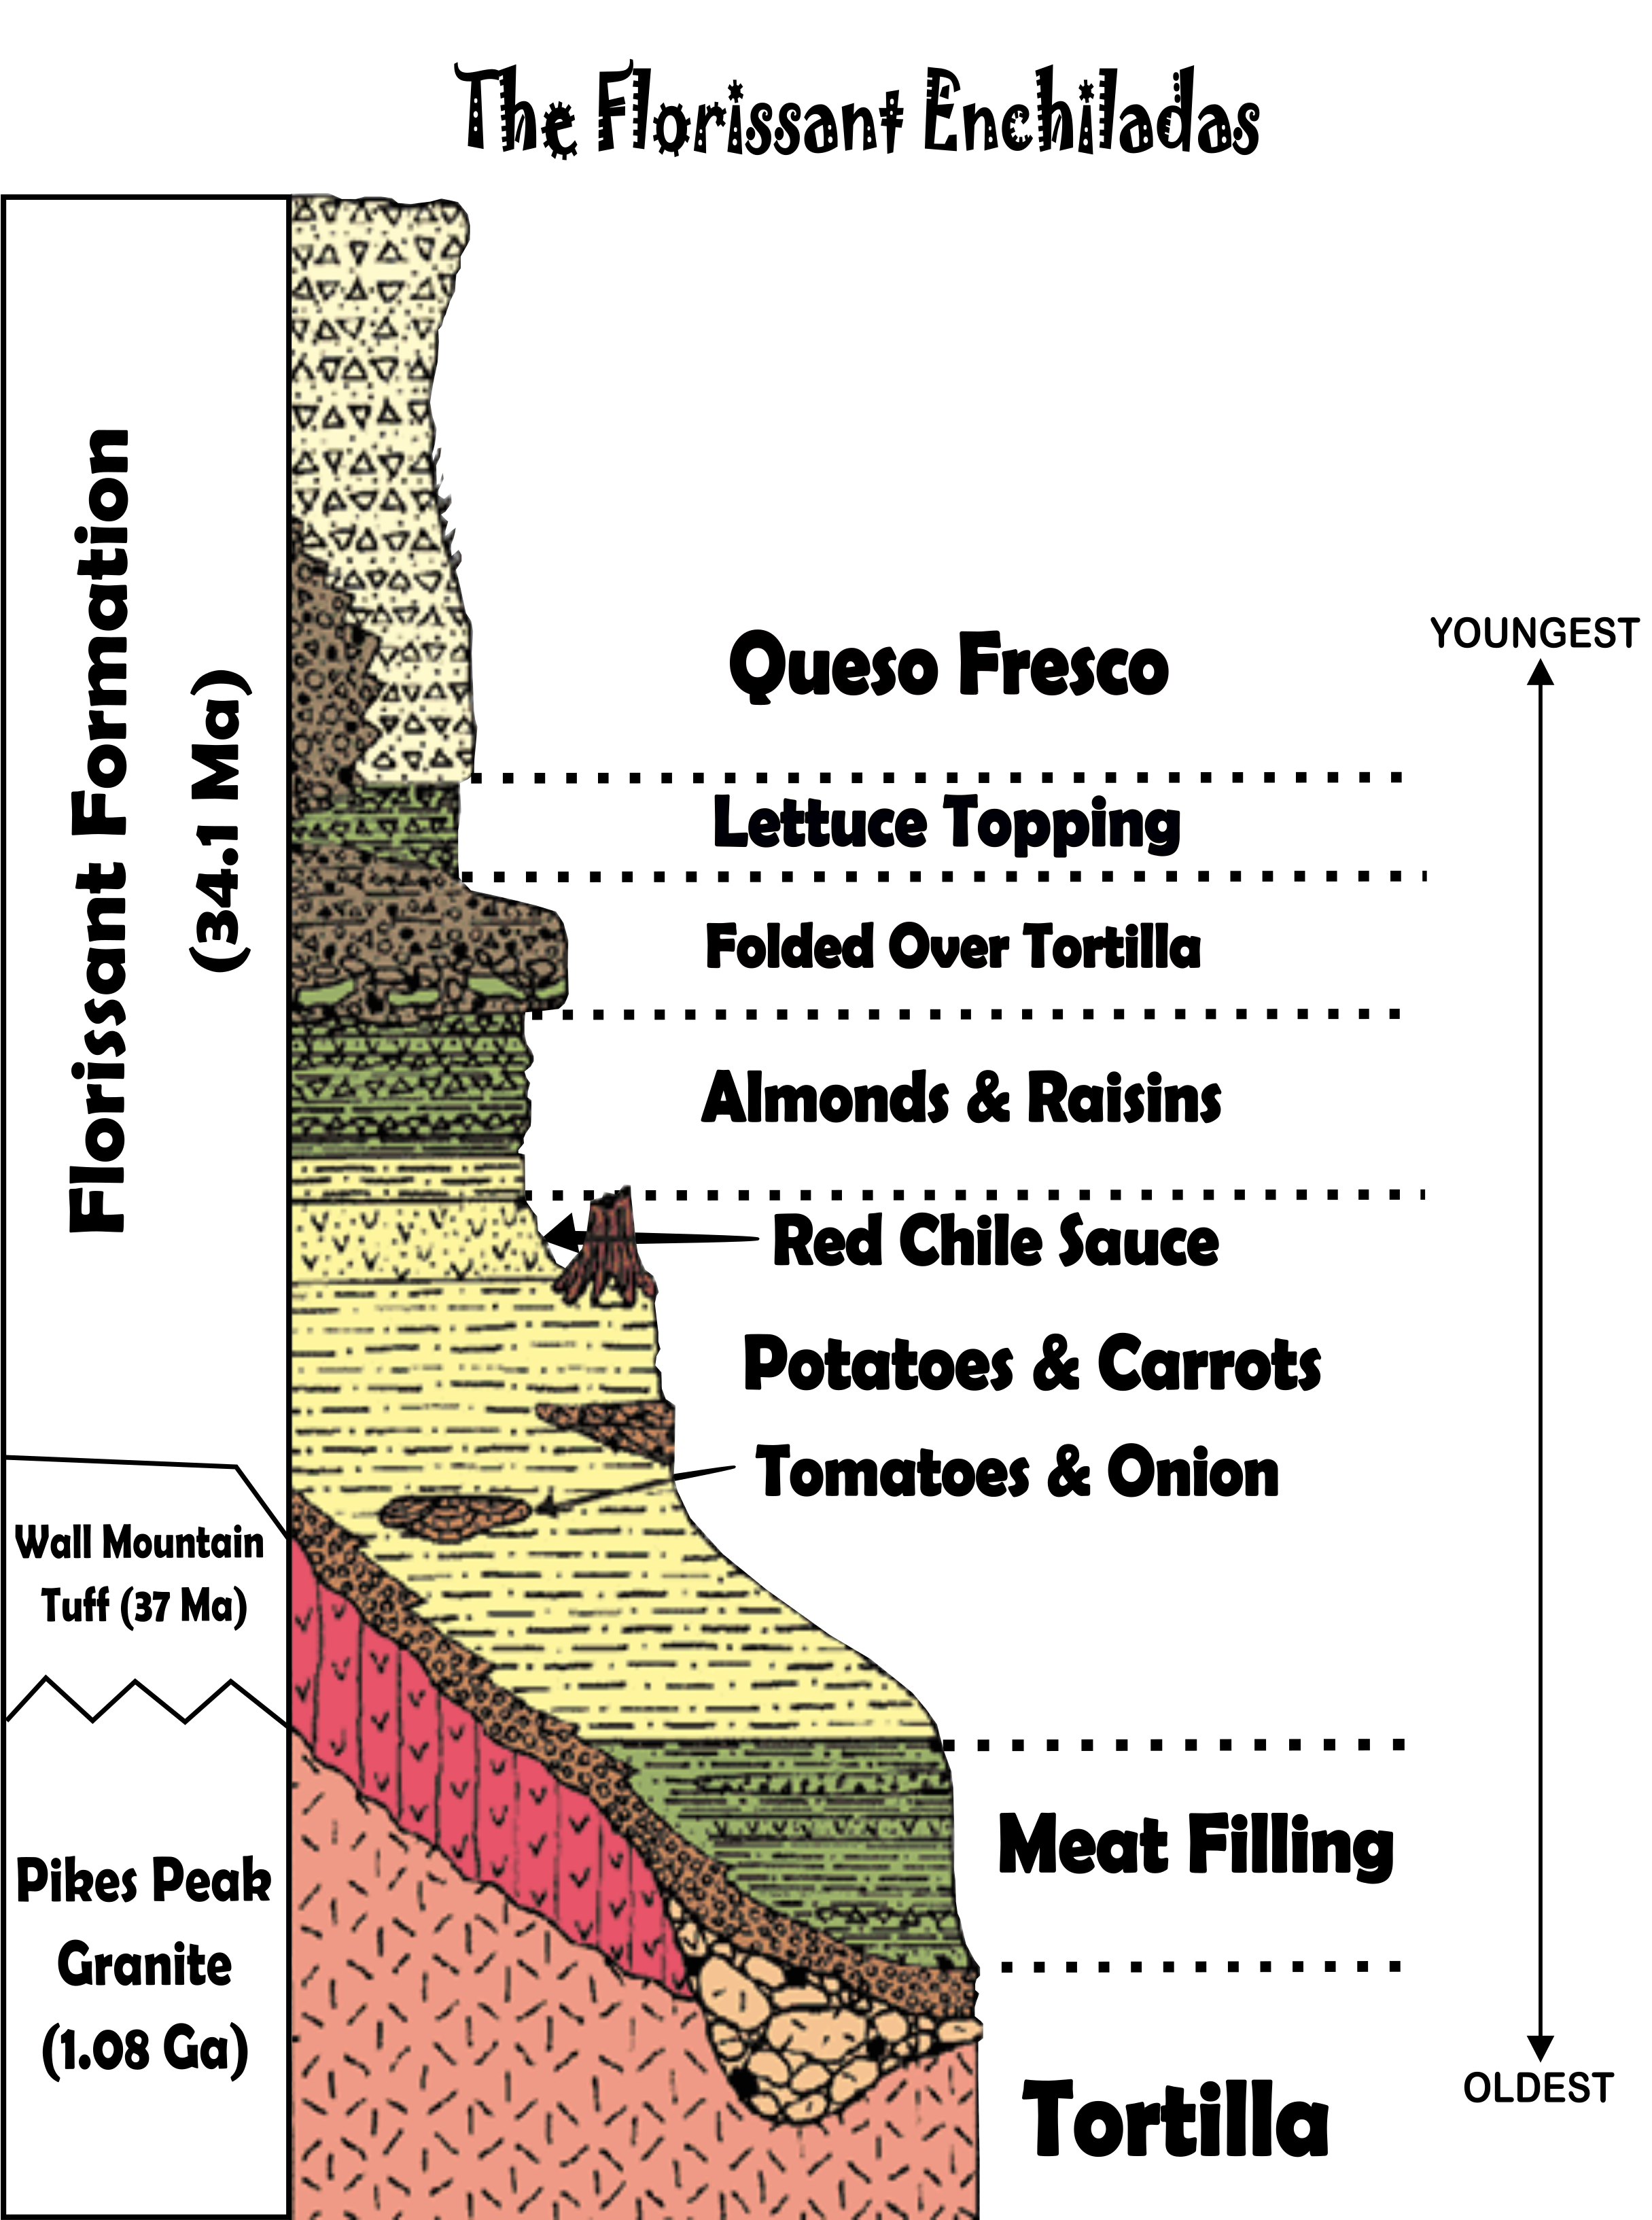 Diagram showing how the ingredients in enchiladas correspond to the rocks layers of Florissant Fossil Beds.